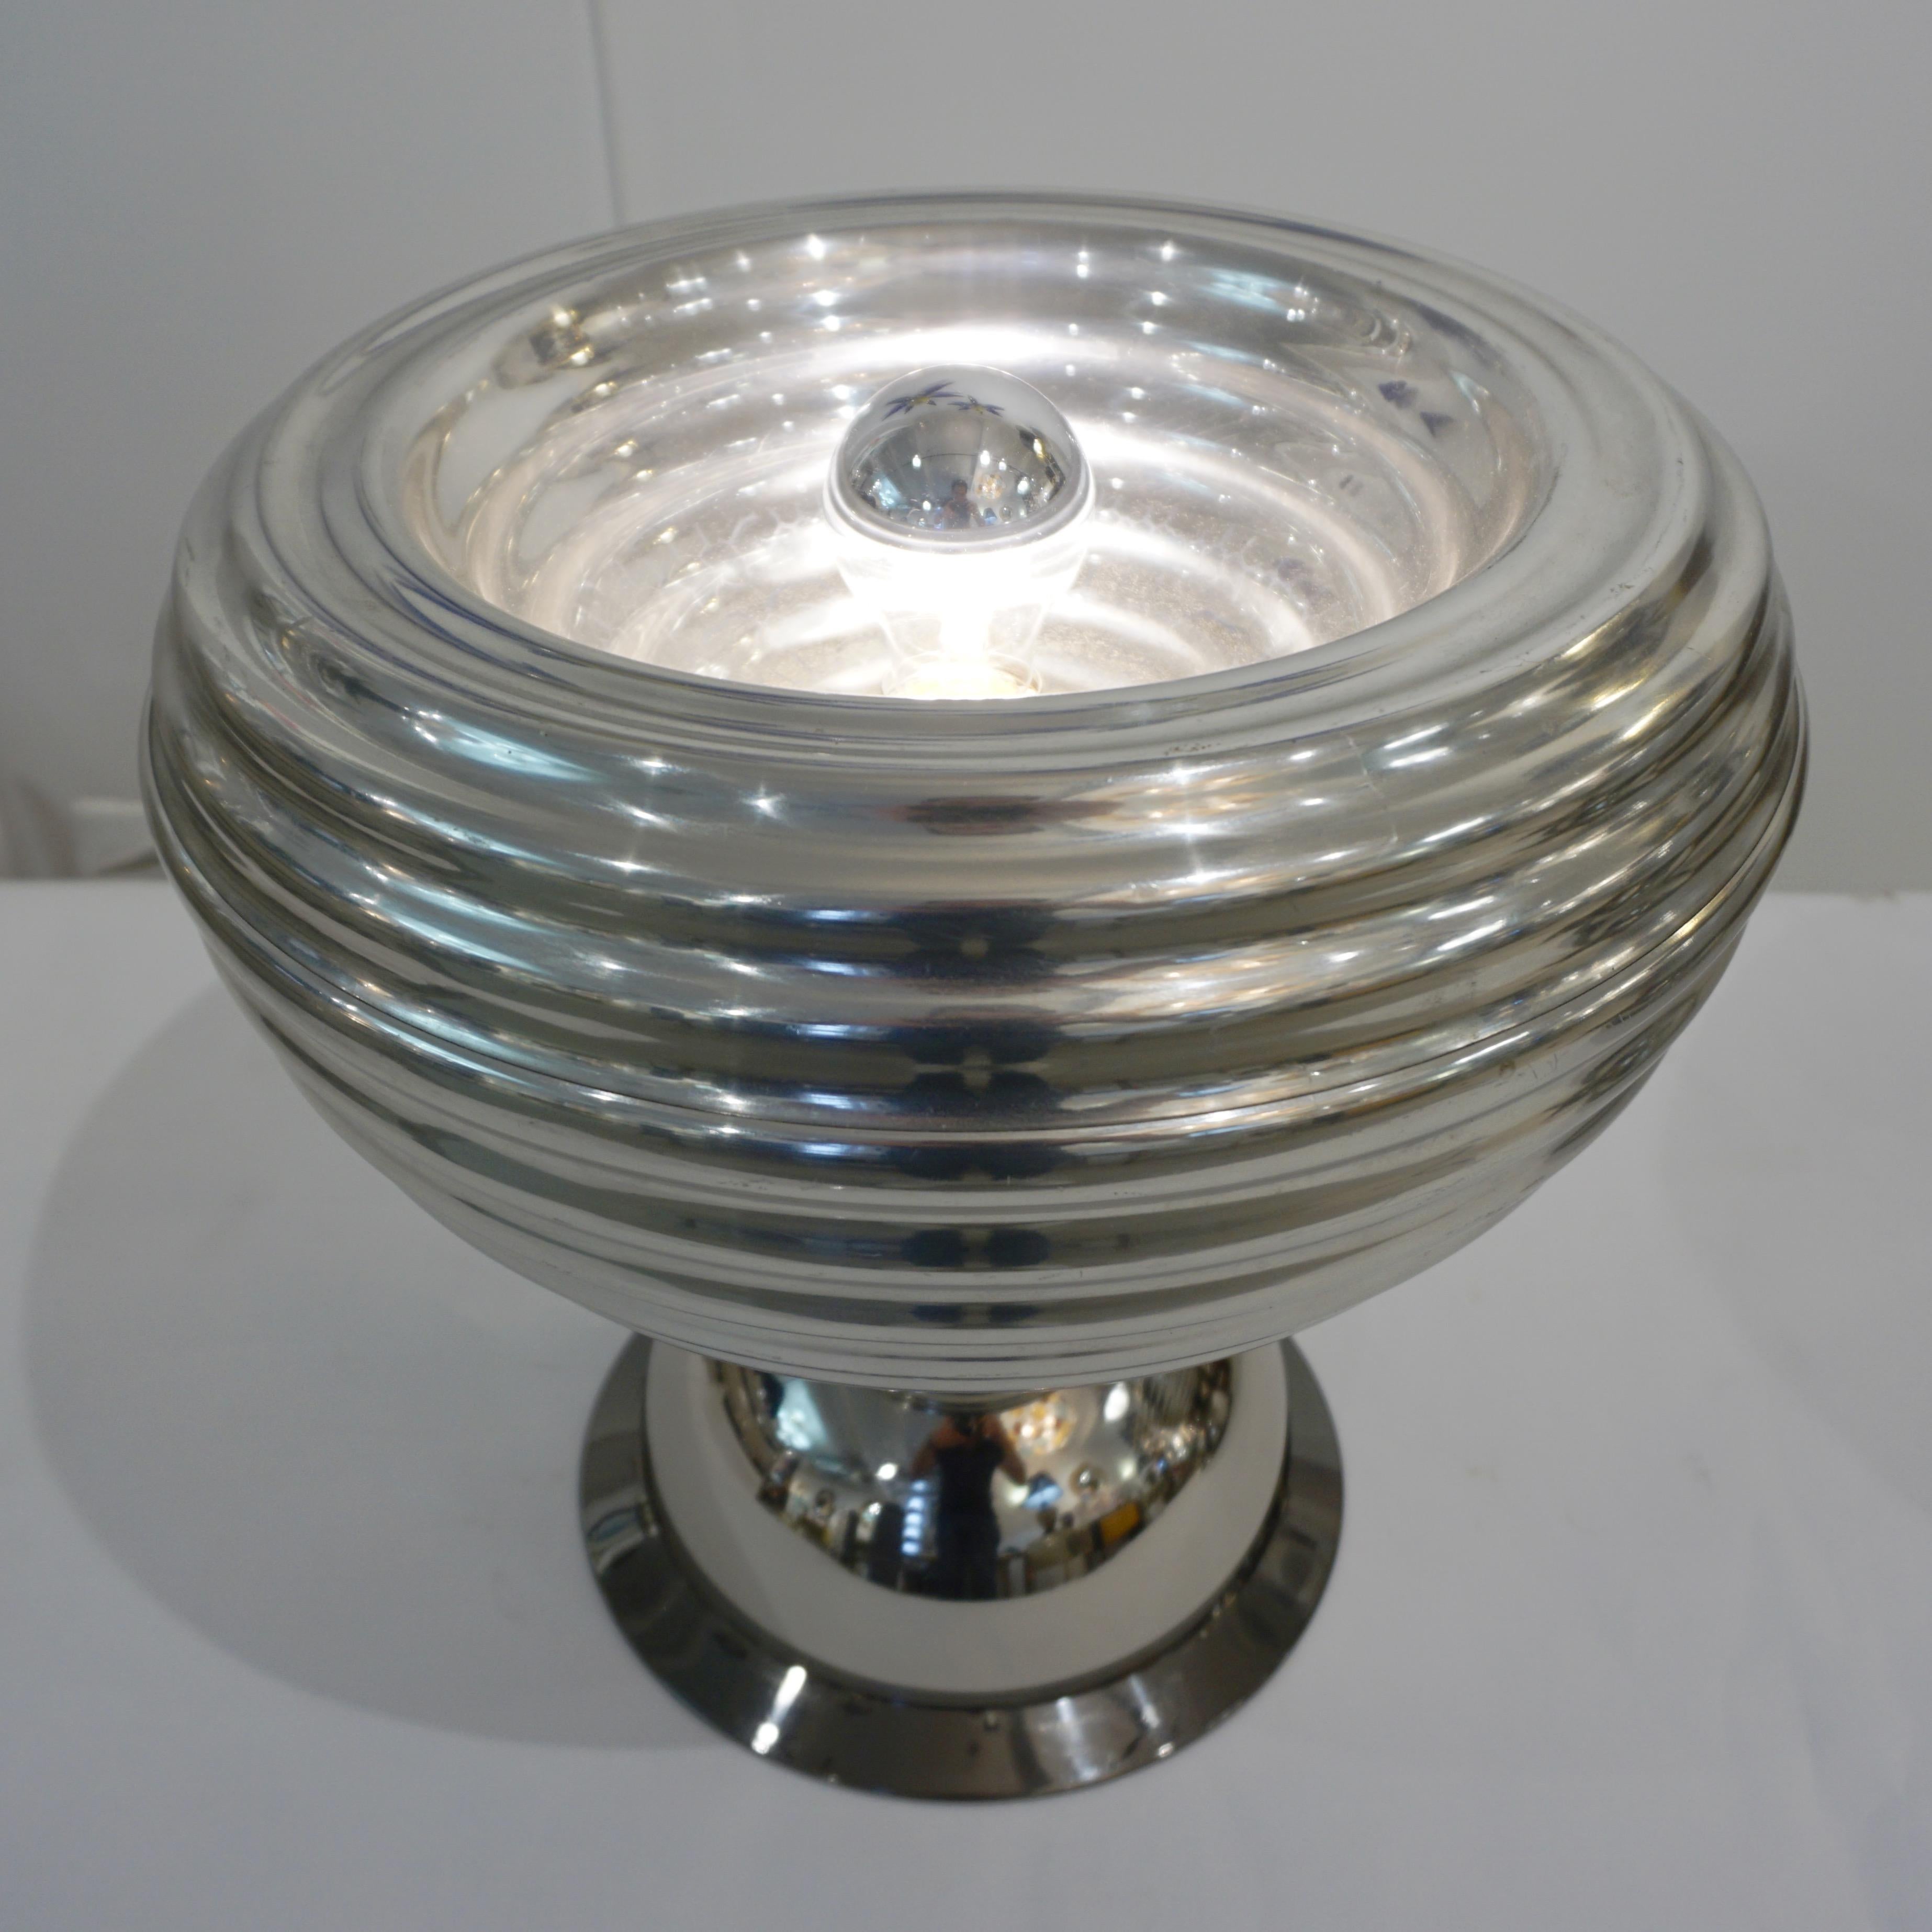 Flos 1960s Silver Tone Pair of Castiglioni Round Polished Aluminum Table Lamps 2